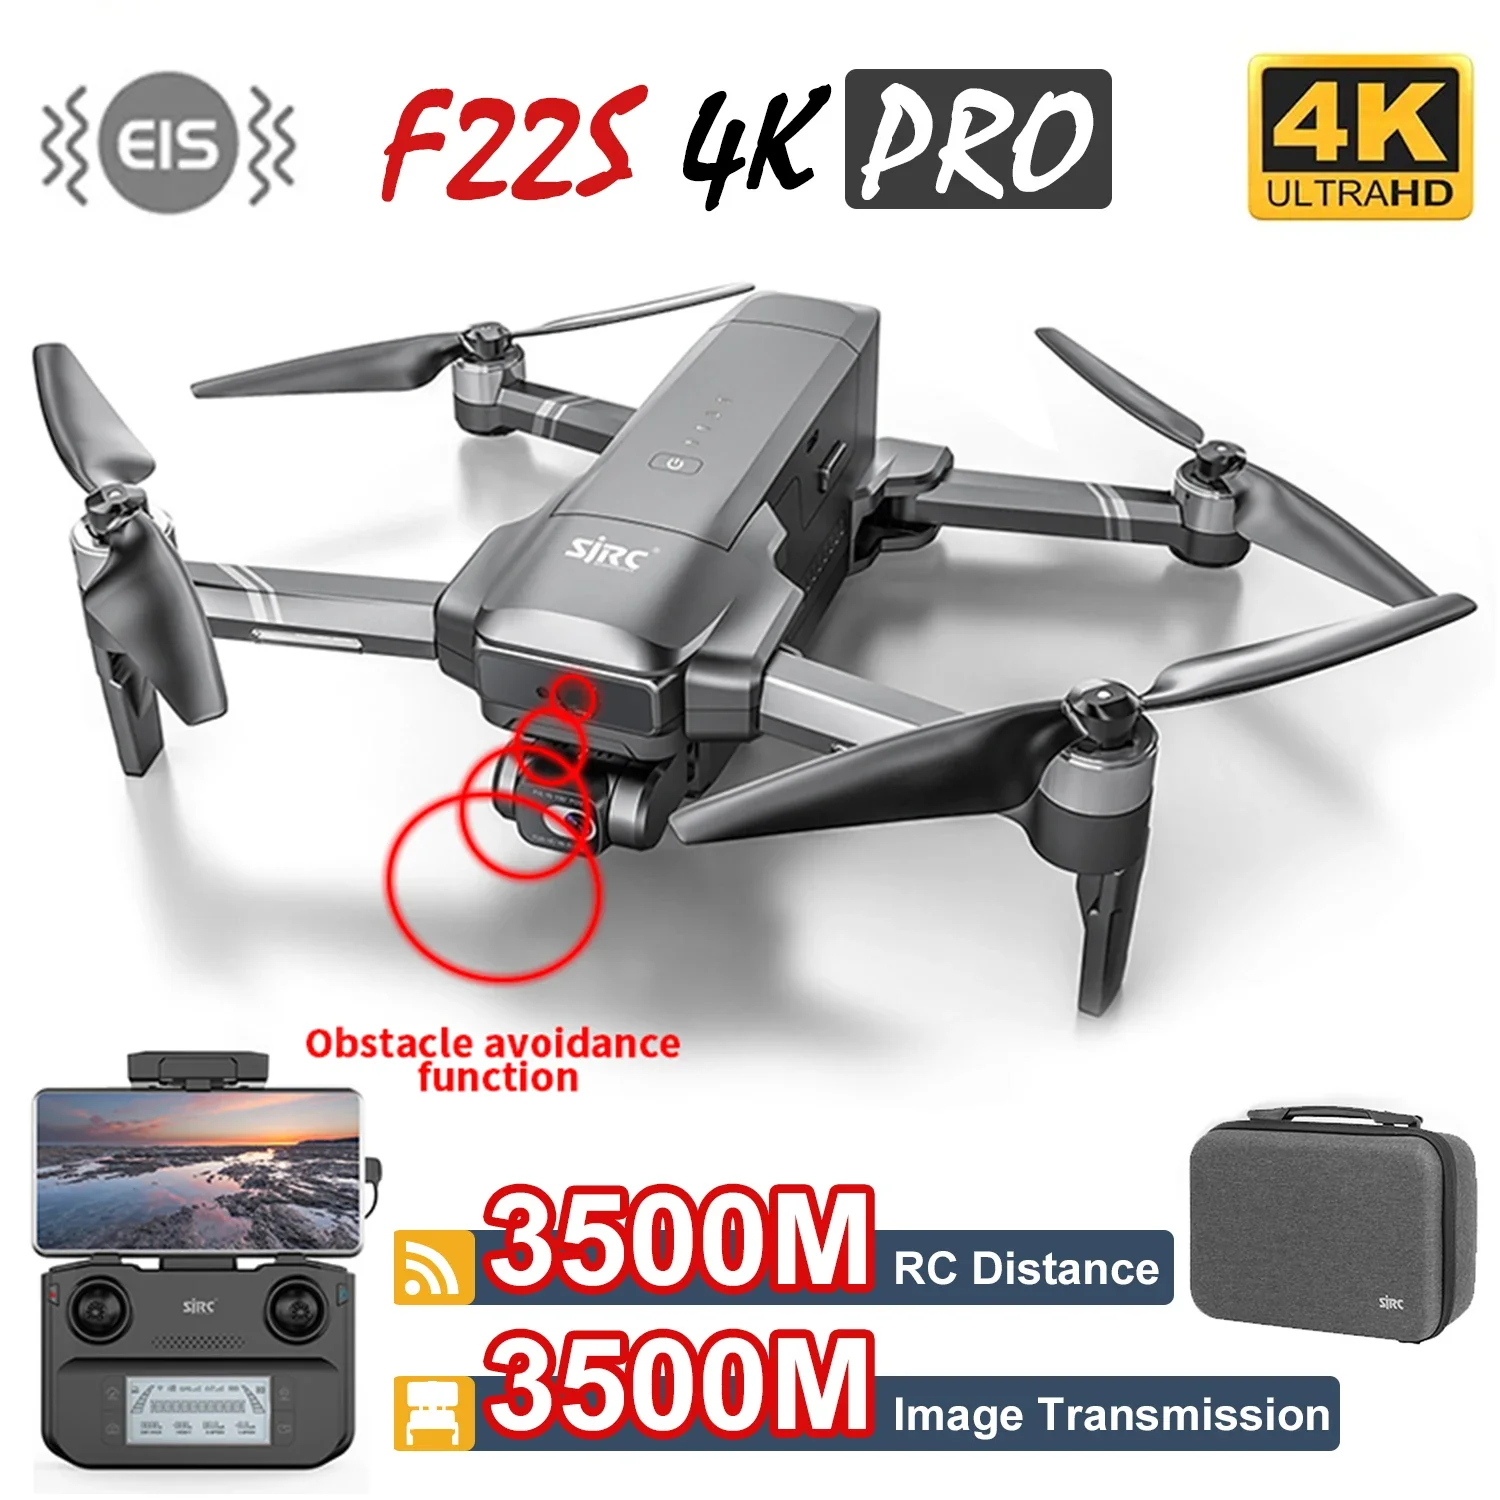 Sjrc F22S 4k Pro Drone 2-axis Eis Gimbal Rc Quadcopter 5G Wifi Gps Obstac - £350.35 GBP+